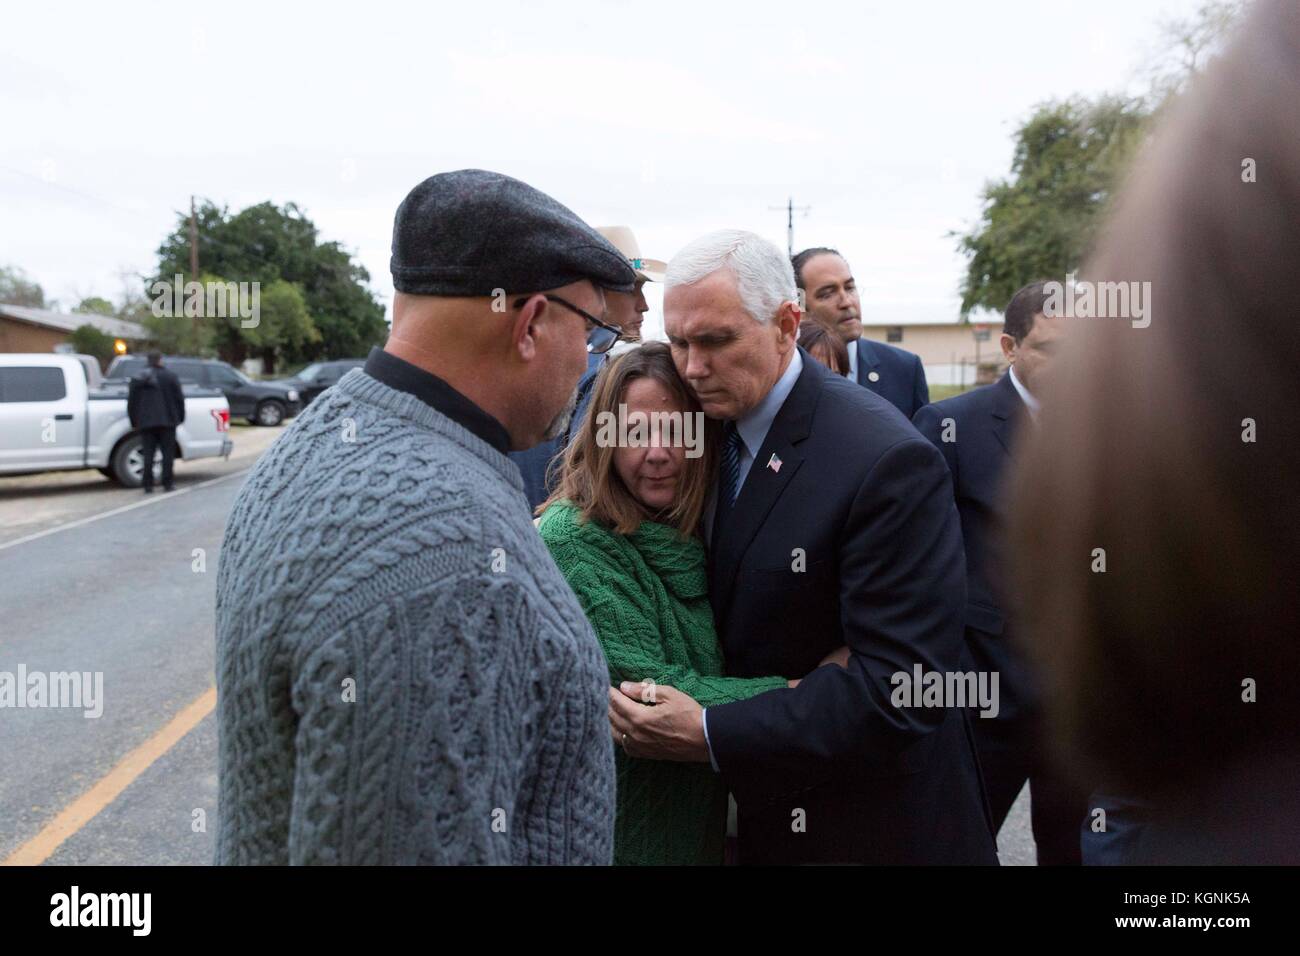 Texas, USA. 8th November, 2017. U.S. Vice President Mike Pence comforts a woman during a meeting with family members and victims of the Sutherland Springs Baptist Church shooting November 8, 2017 in Floresville, Texas. Credit: Planetpix/Alamy Live News Stock Photo